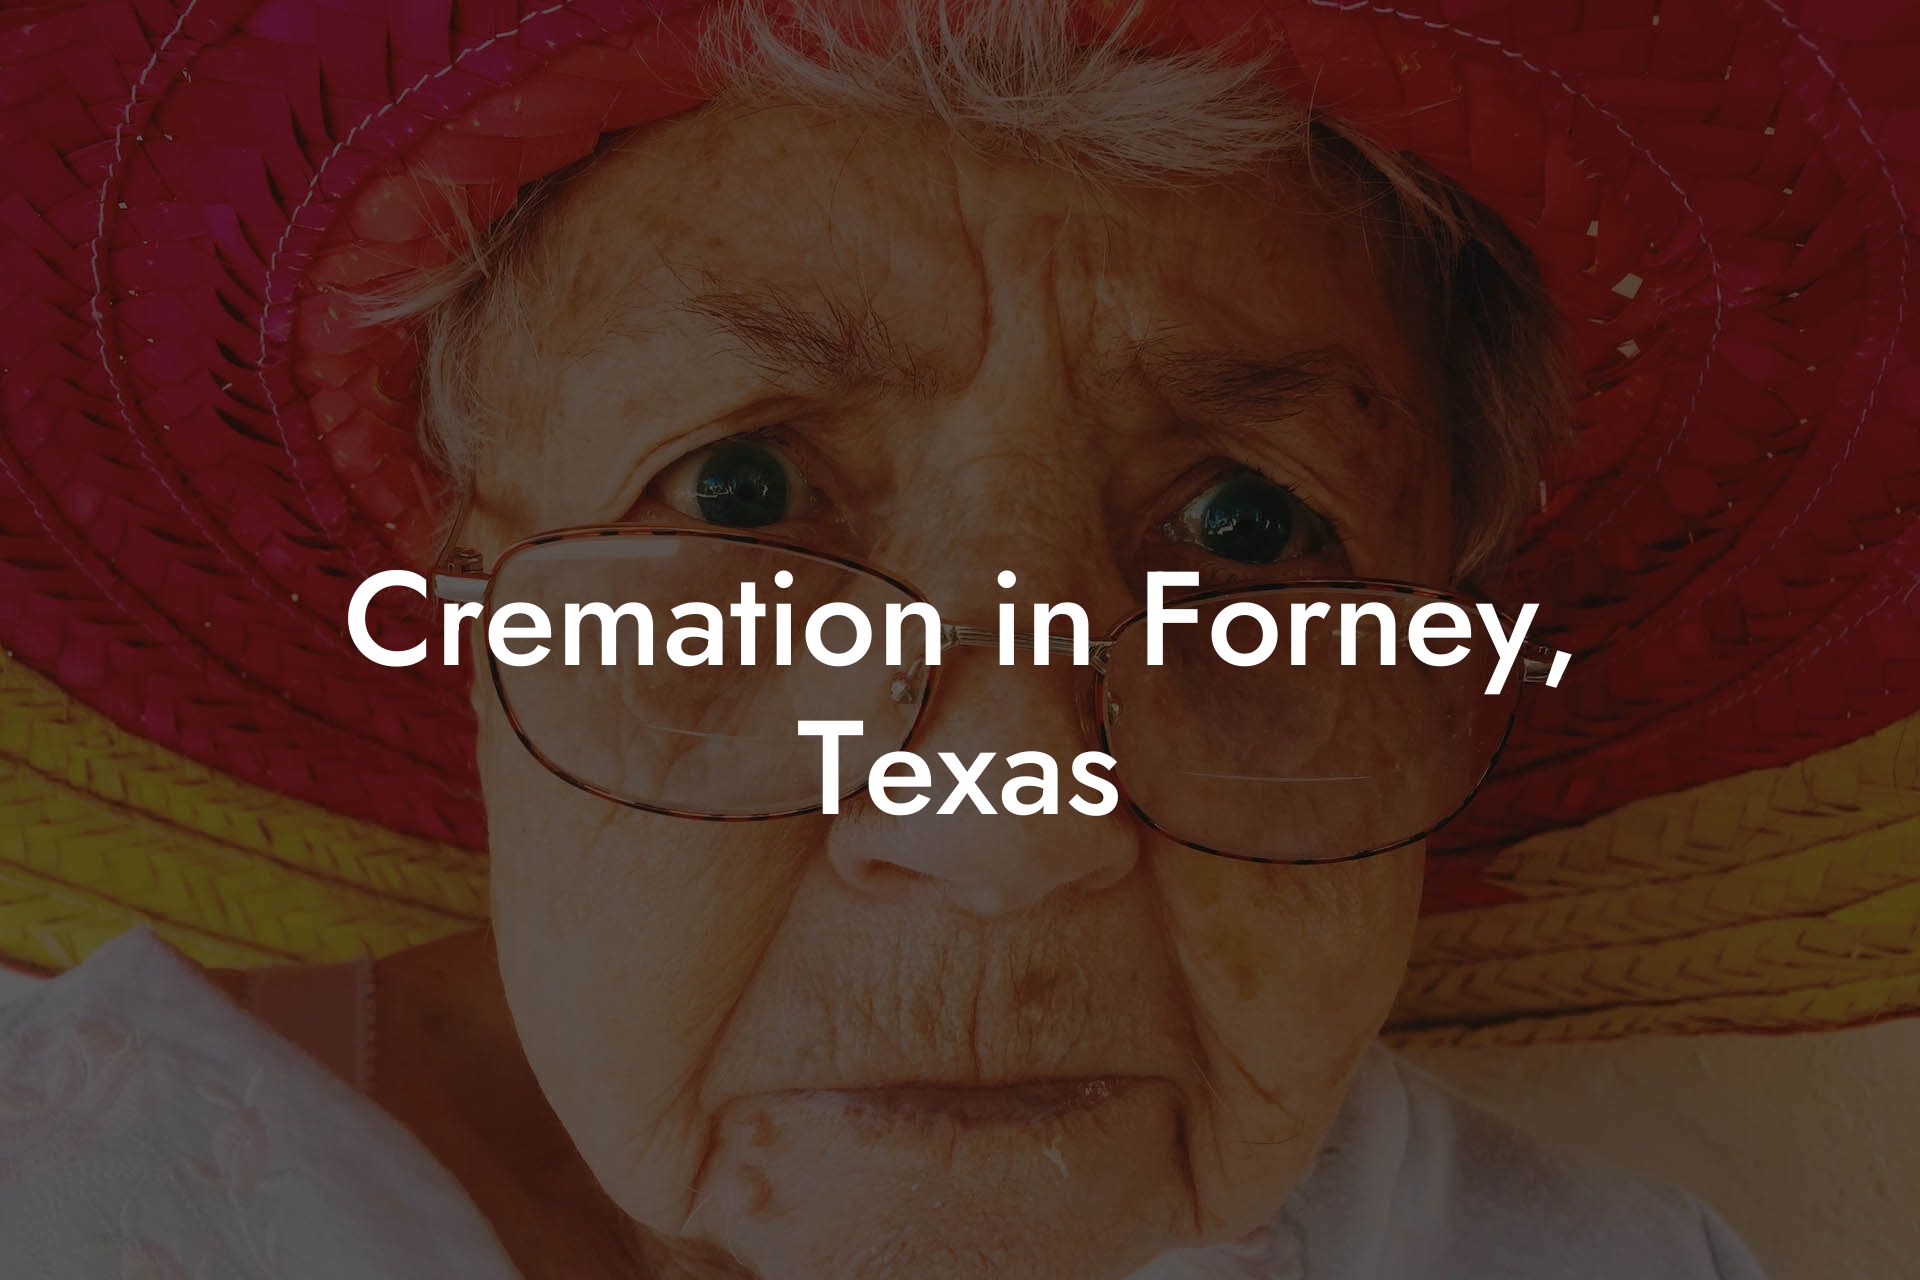 Cremation in Forney, Texas